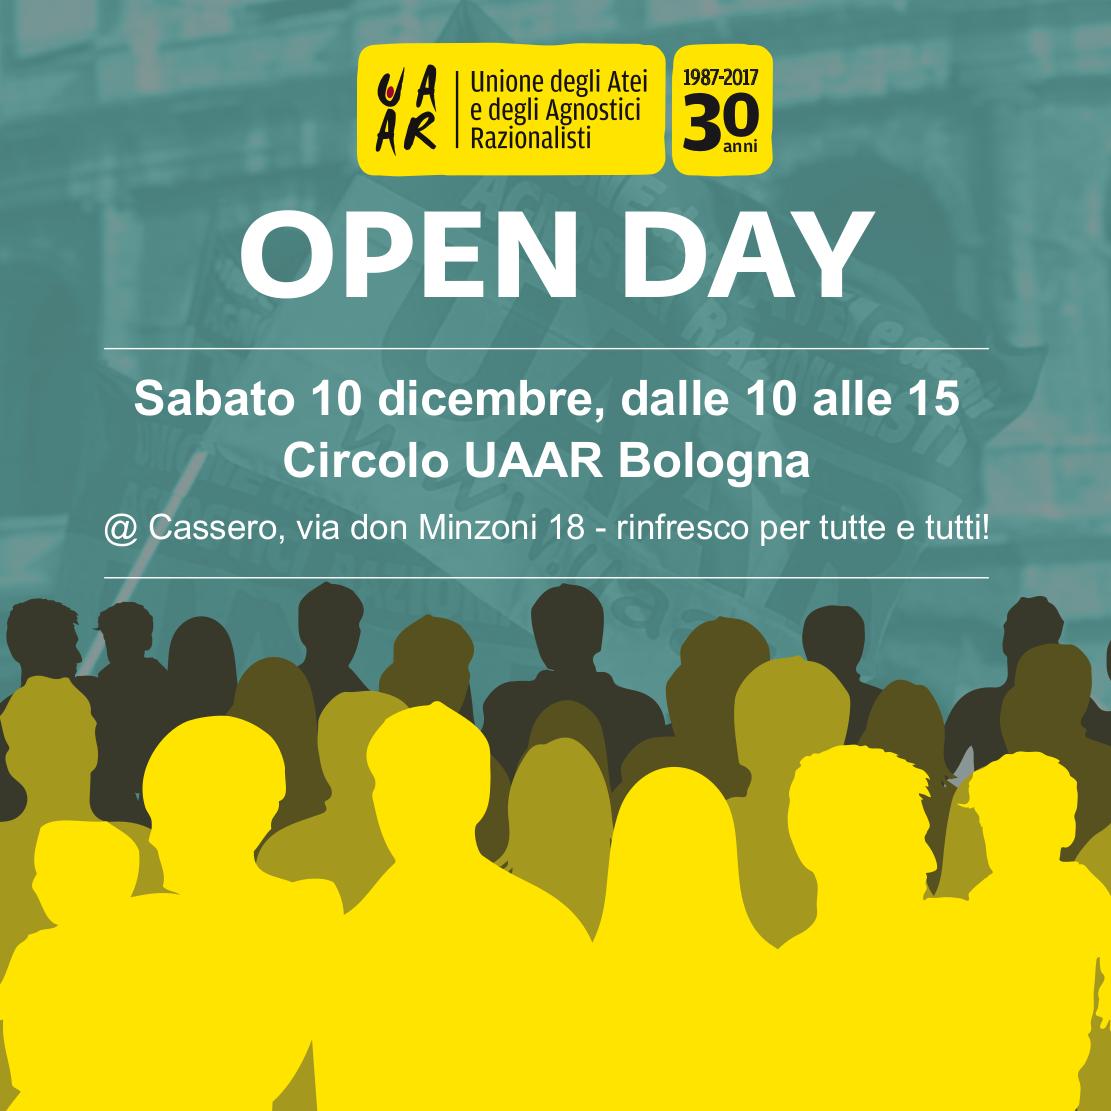 Open Day 10 dic 2016